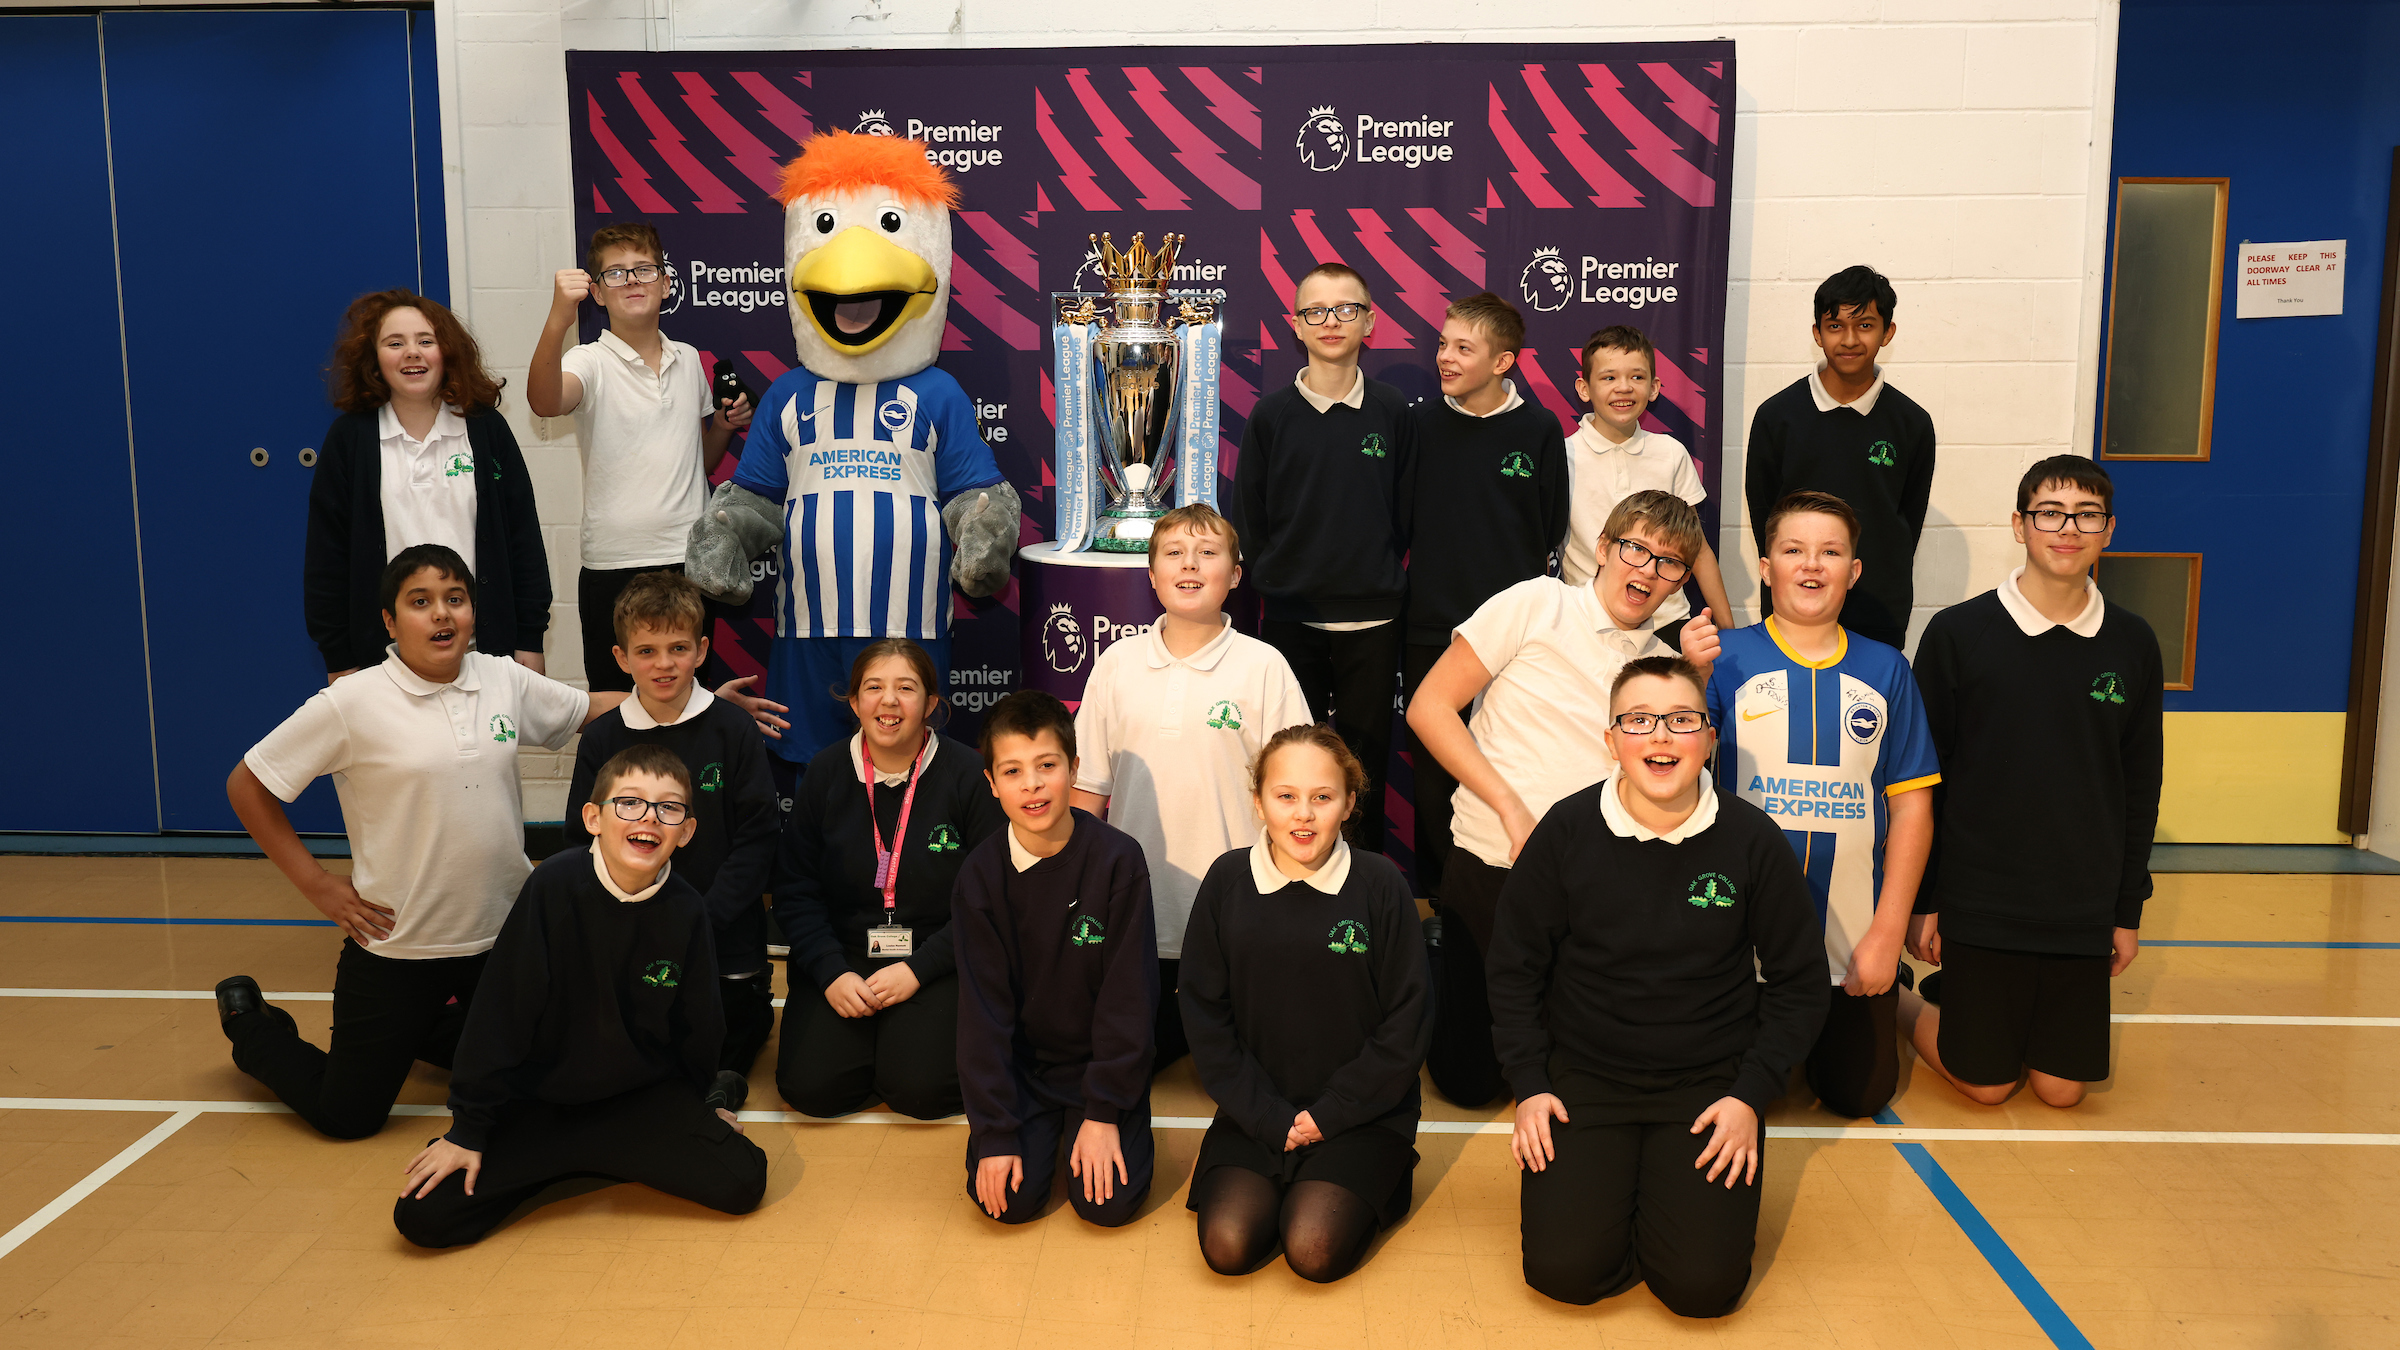 Worthing school visited by Premier League trophy